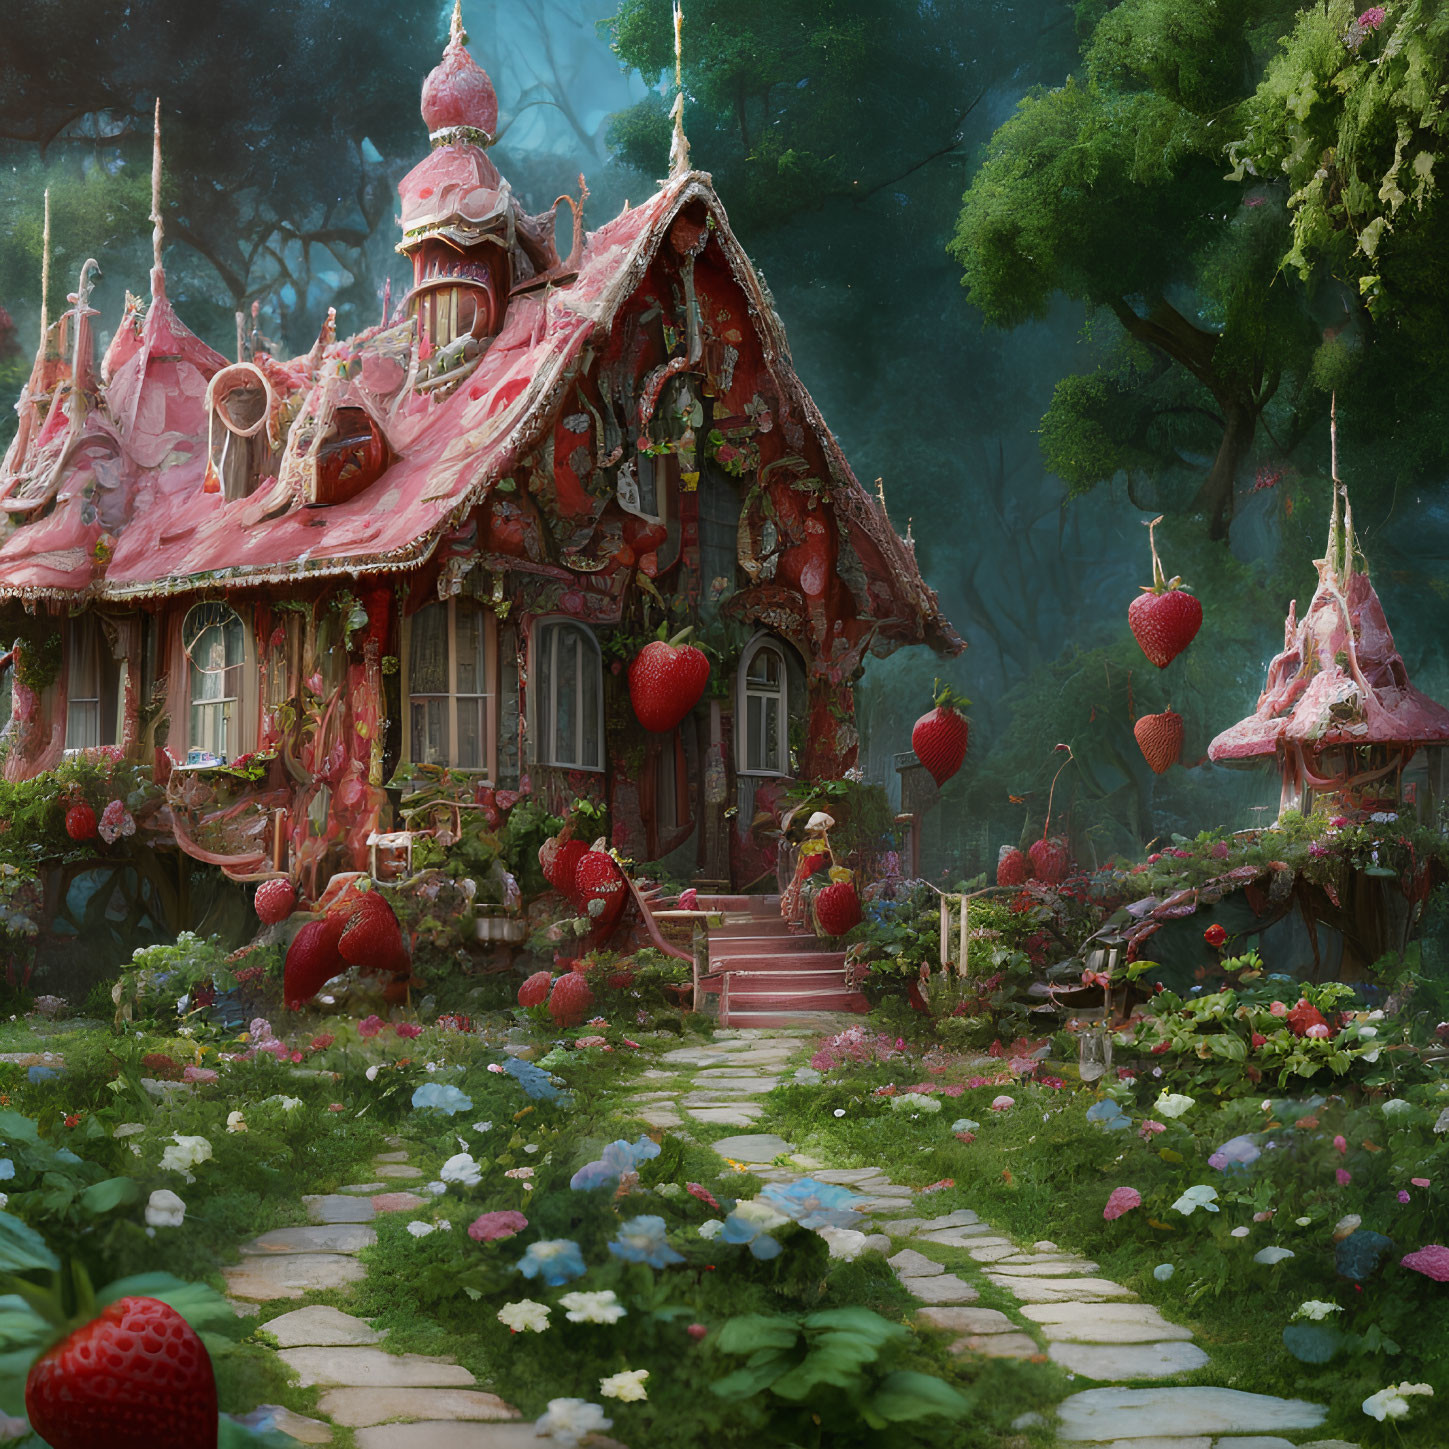 Enchanted forest cottage with strawberry motifs and lush surroundings